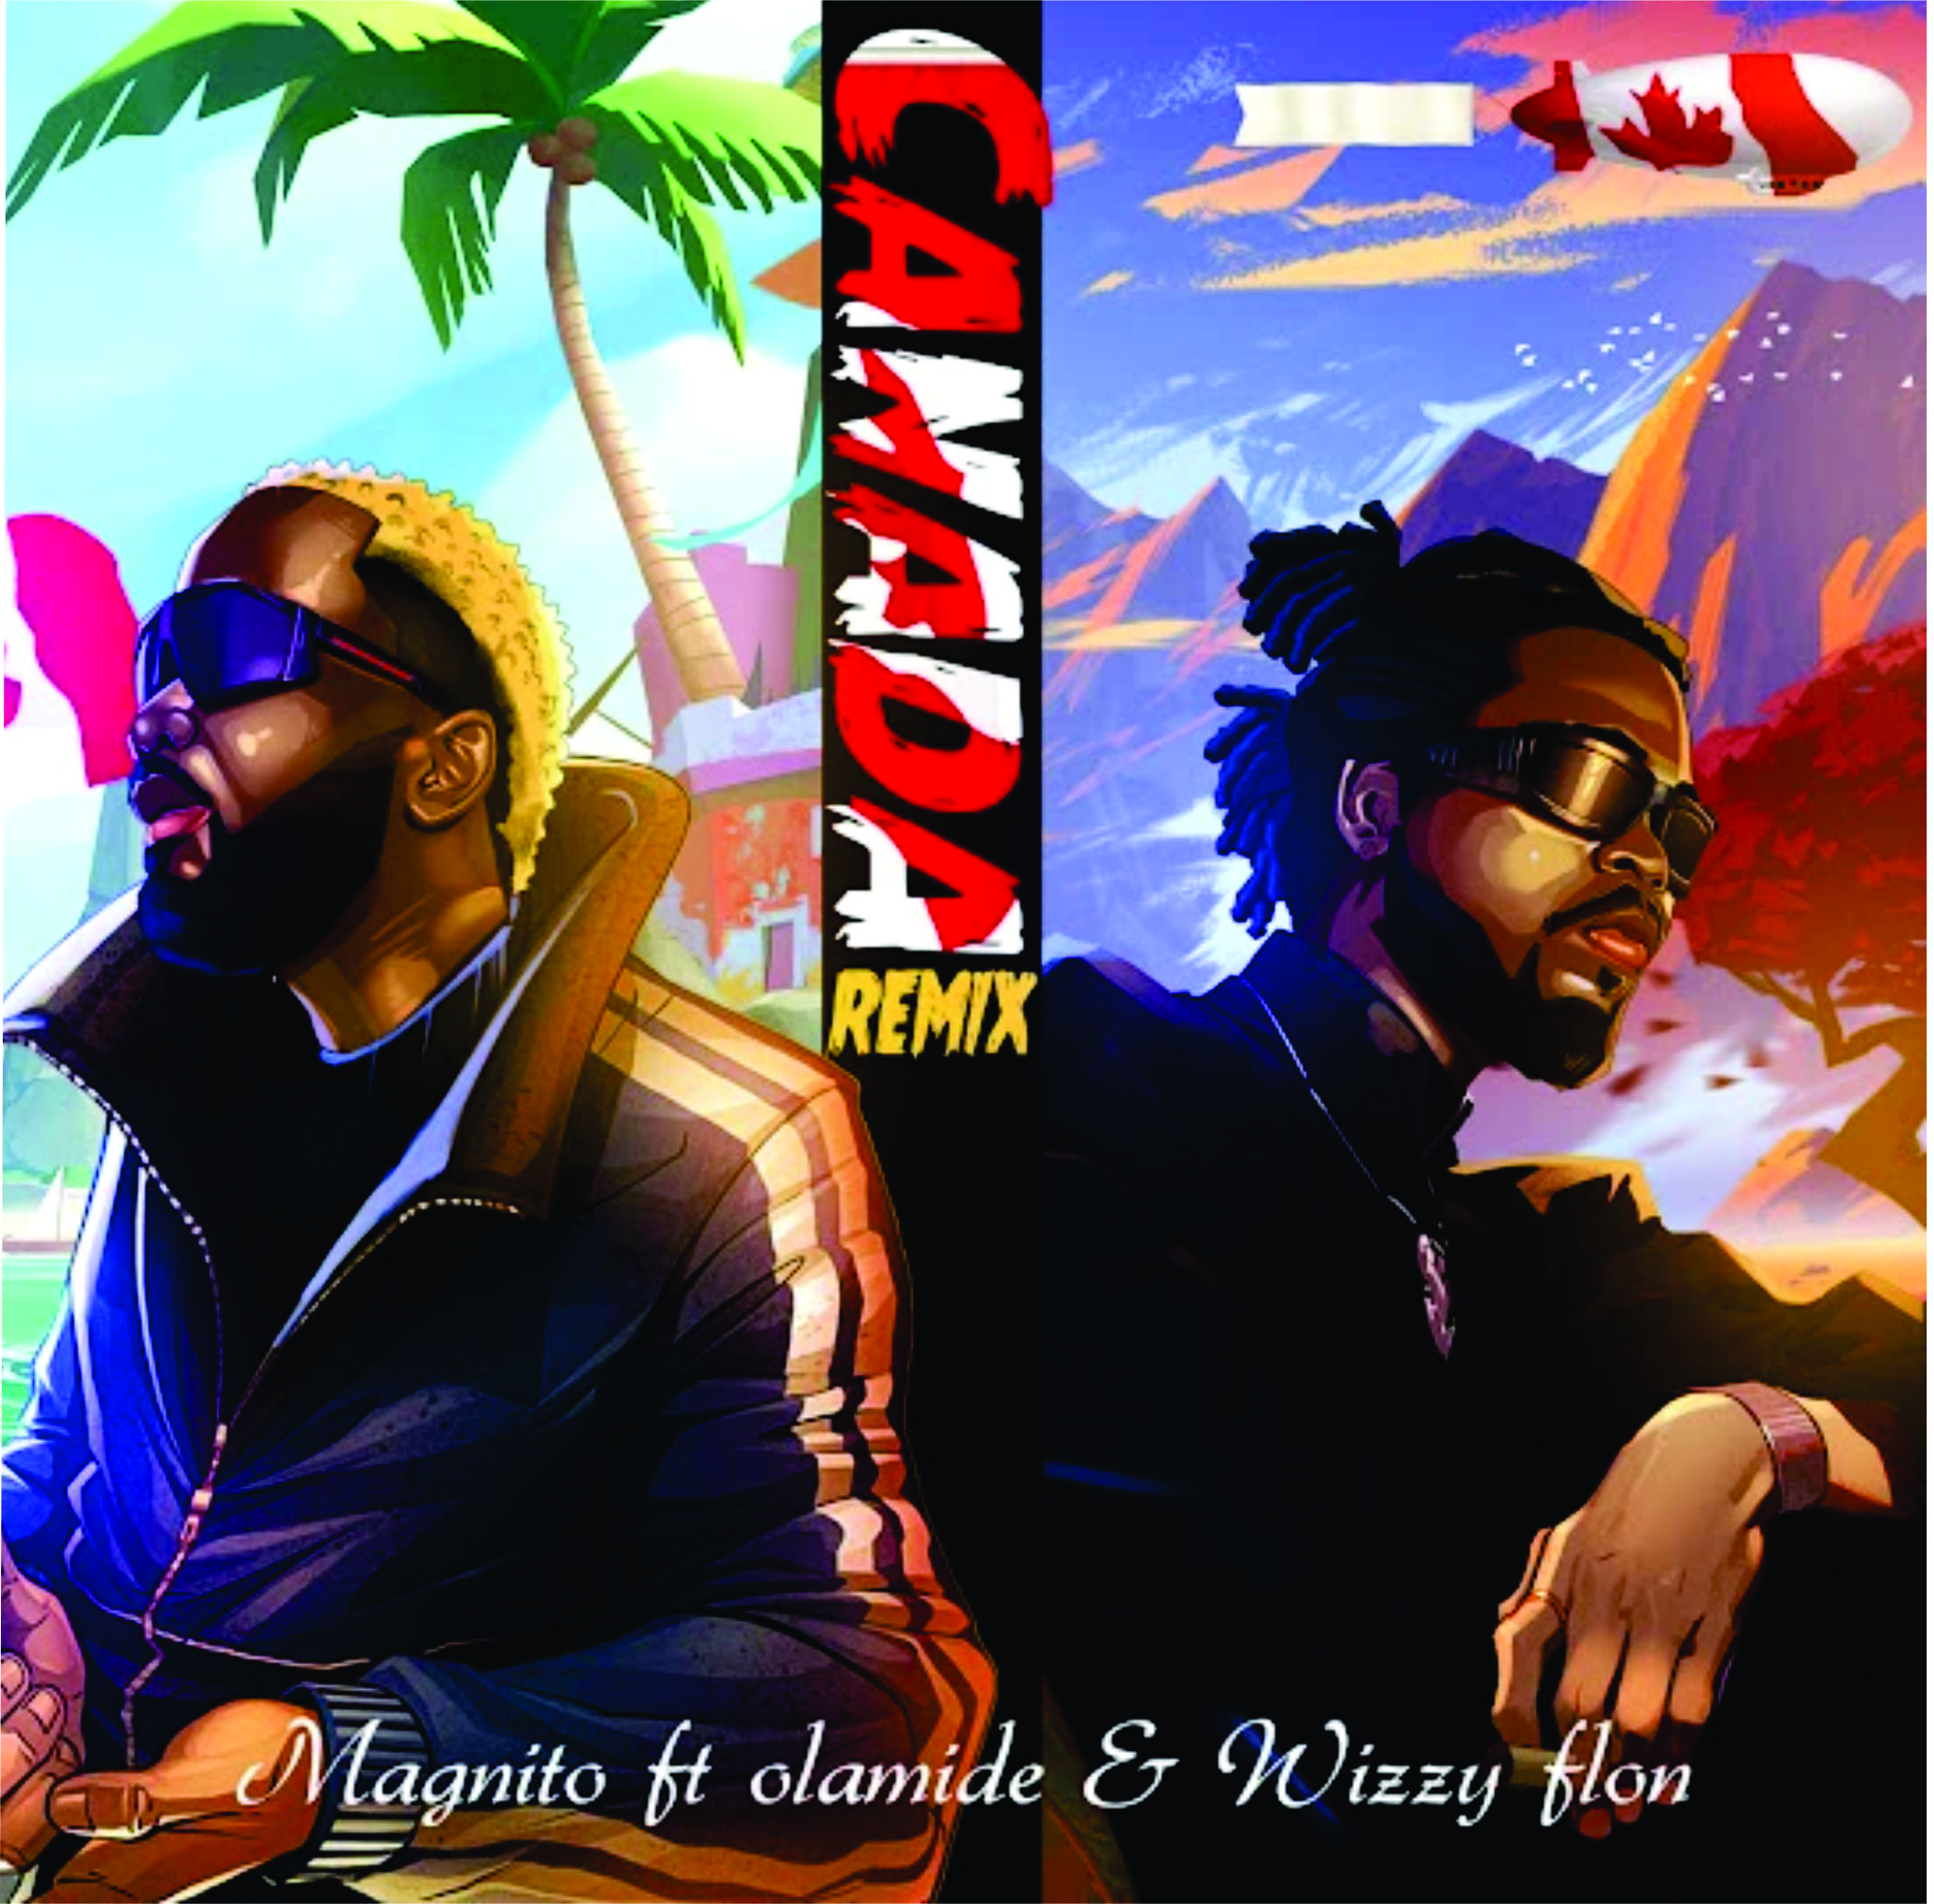 Download Music: Magnito – Canada (Remix) ft. Olamide & Wizzy Flon